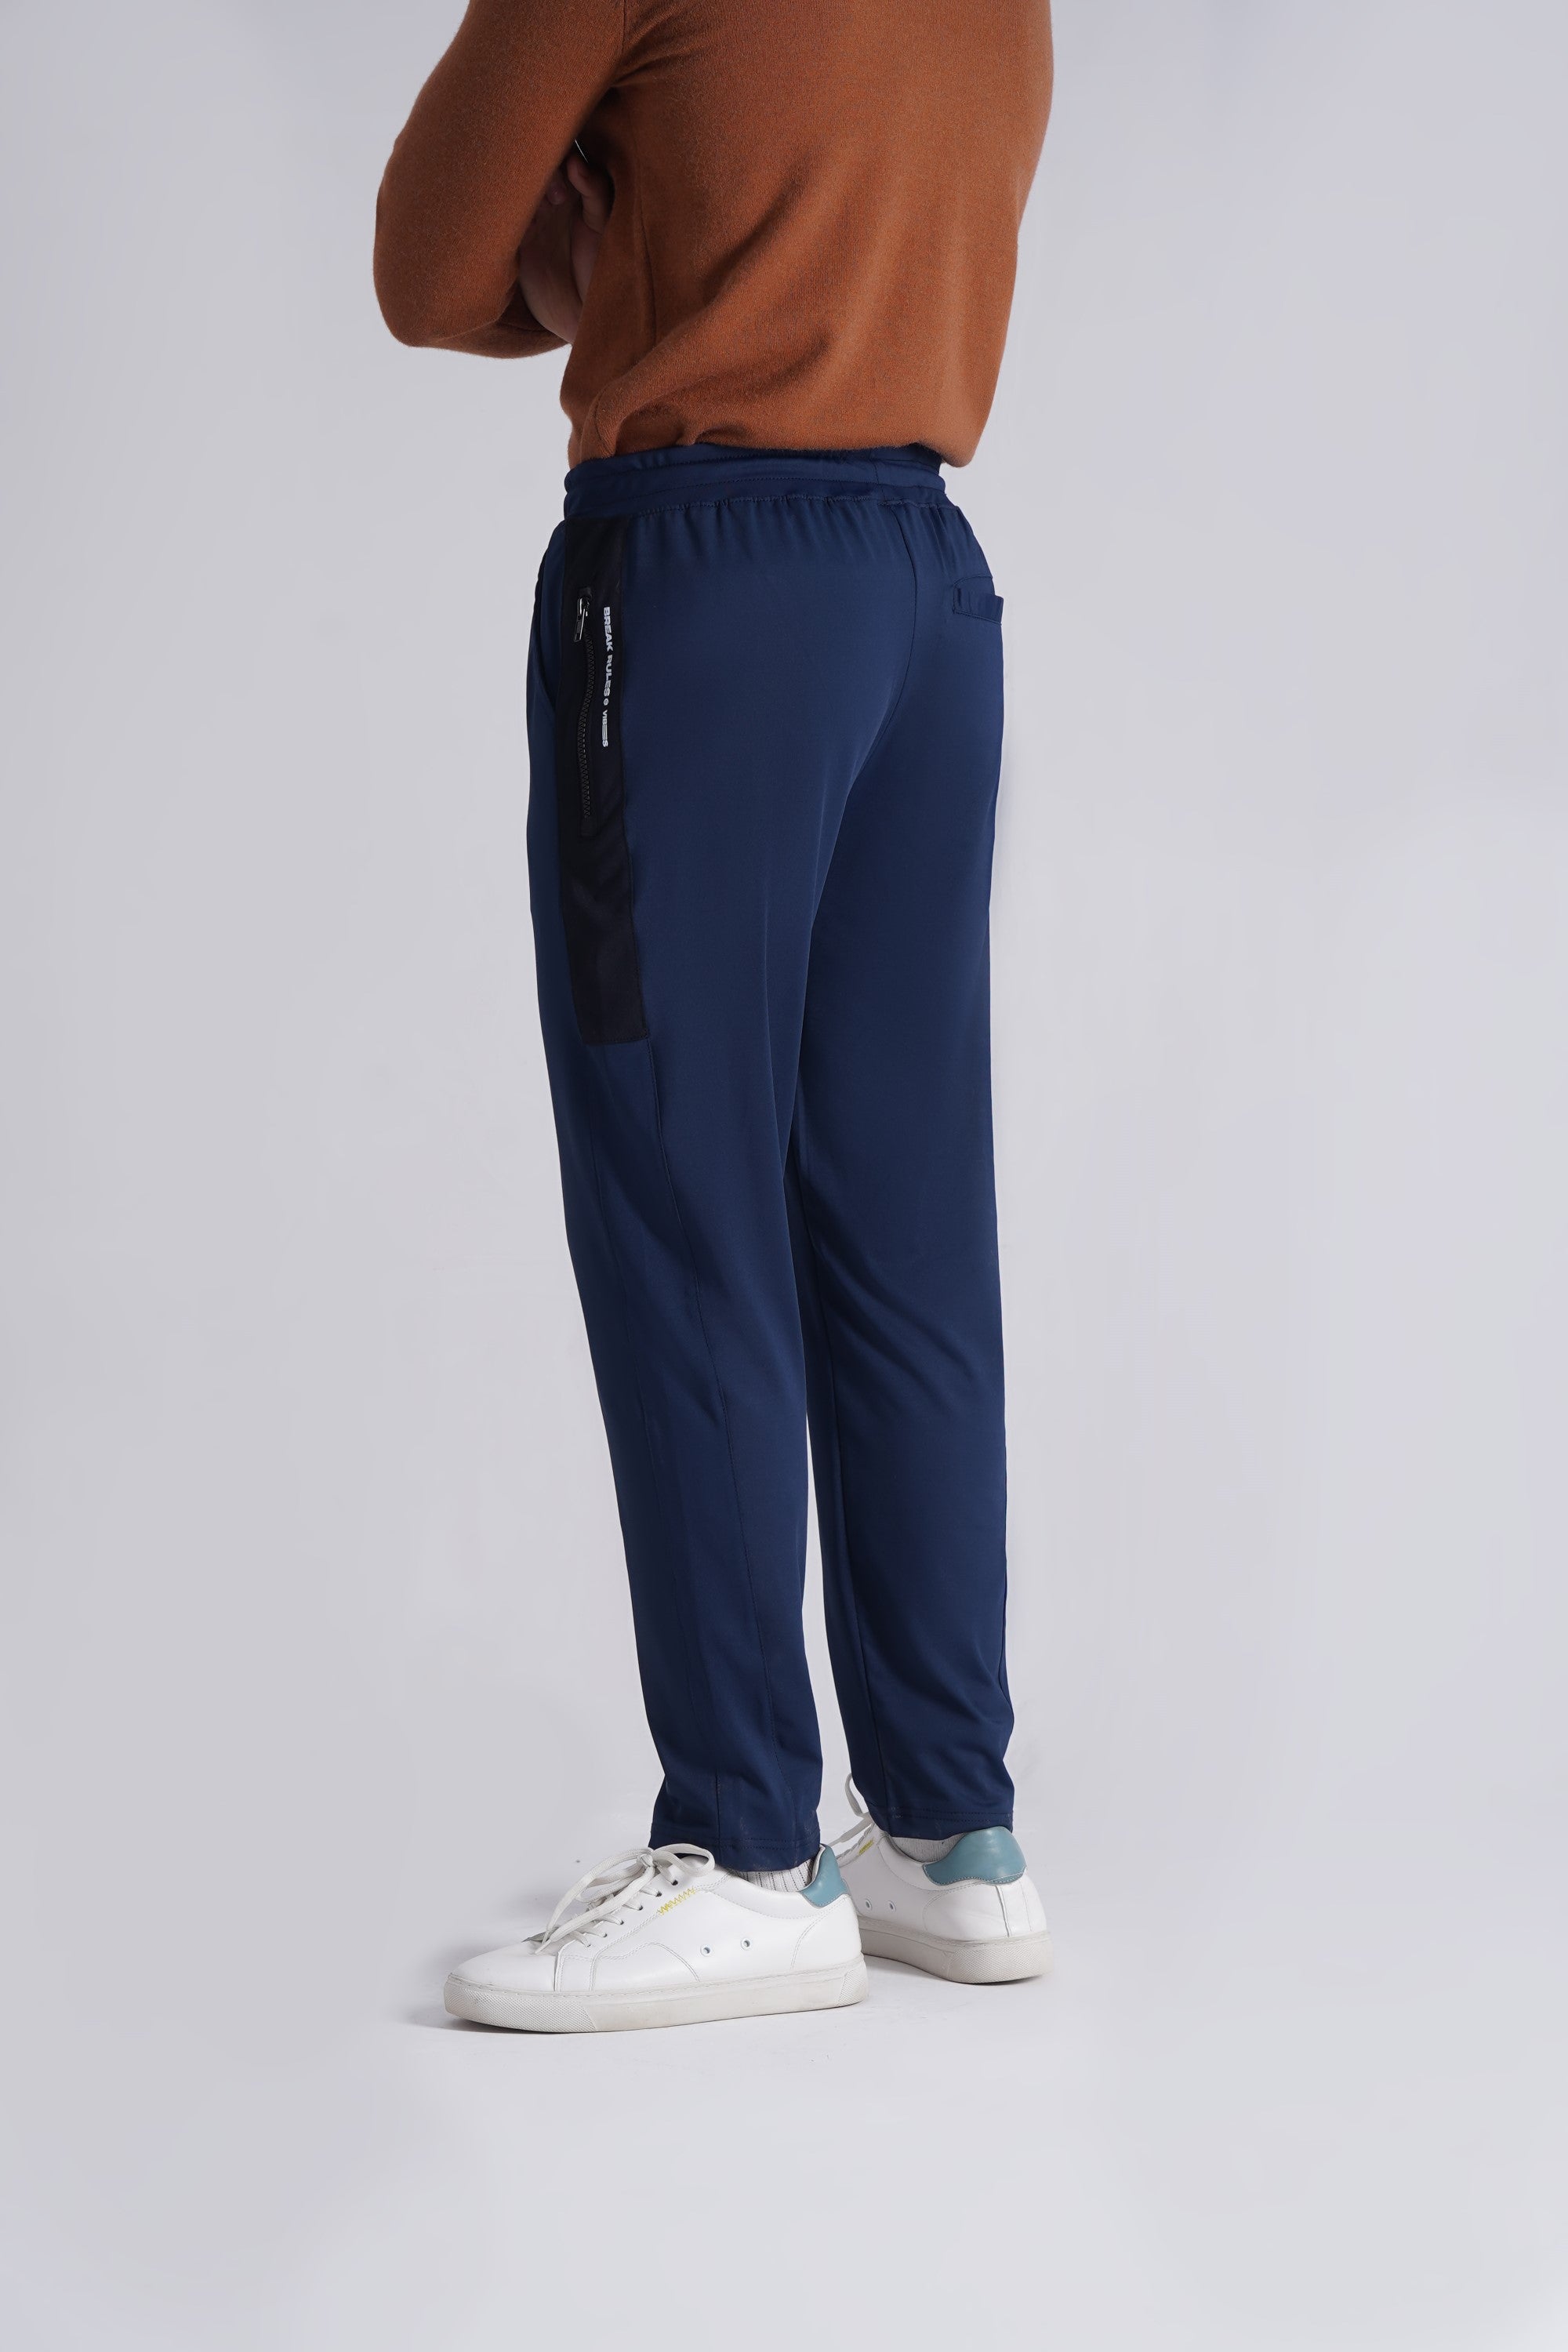 Navy Dry Fit Trousers